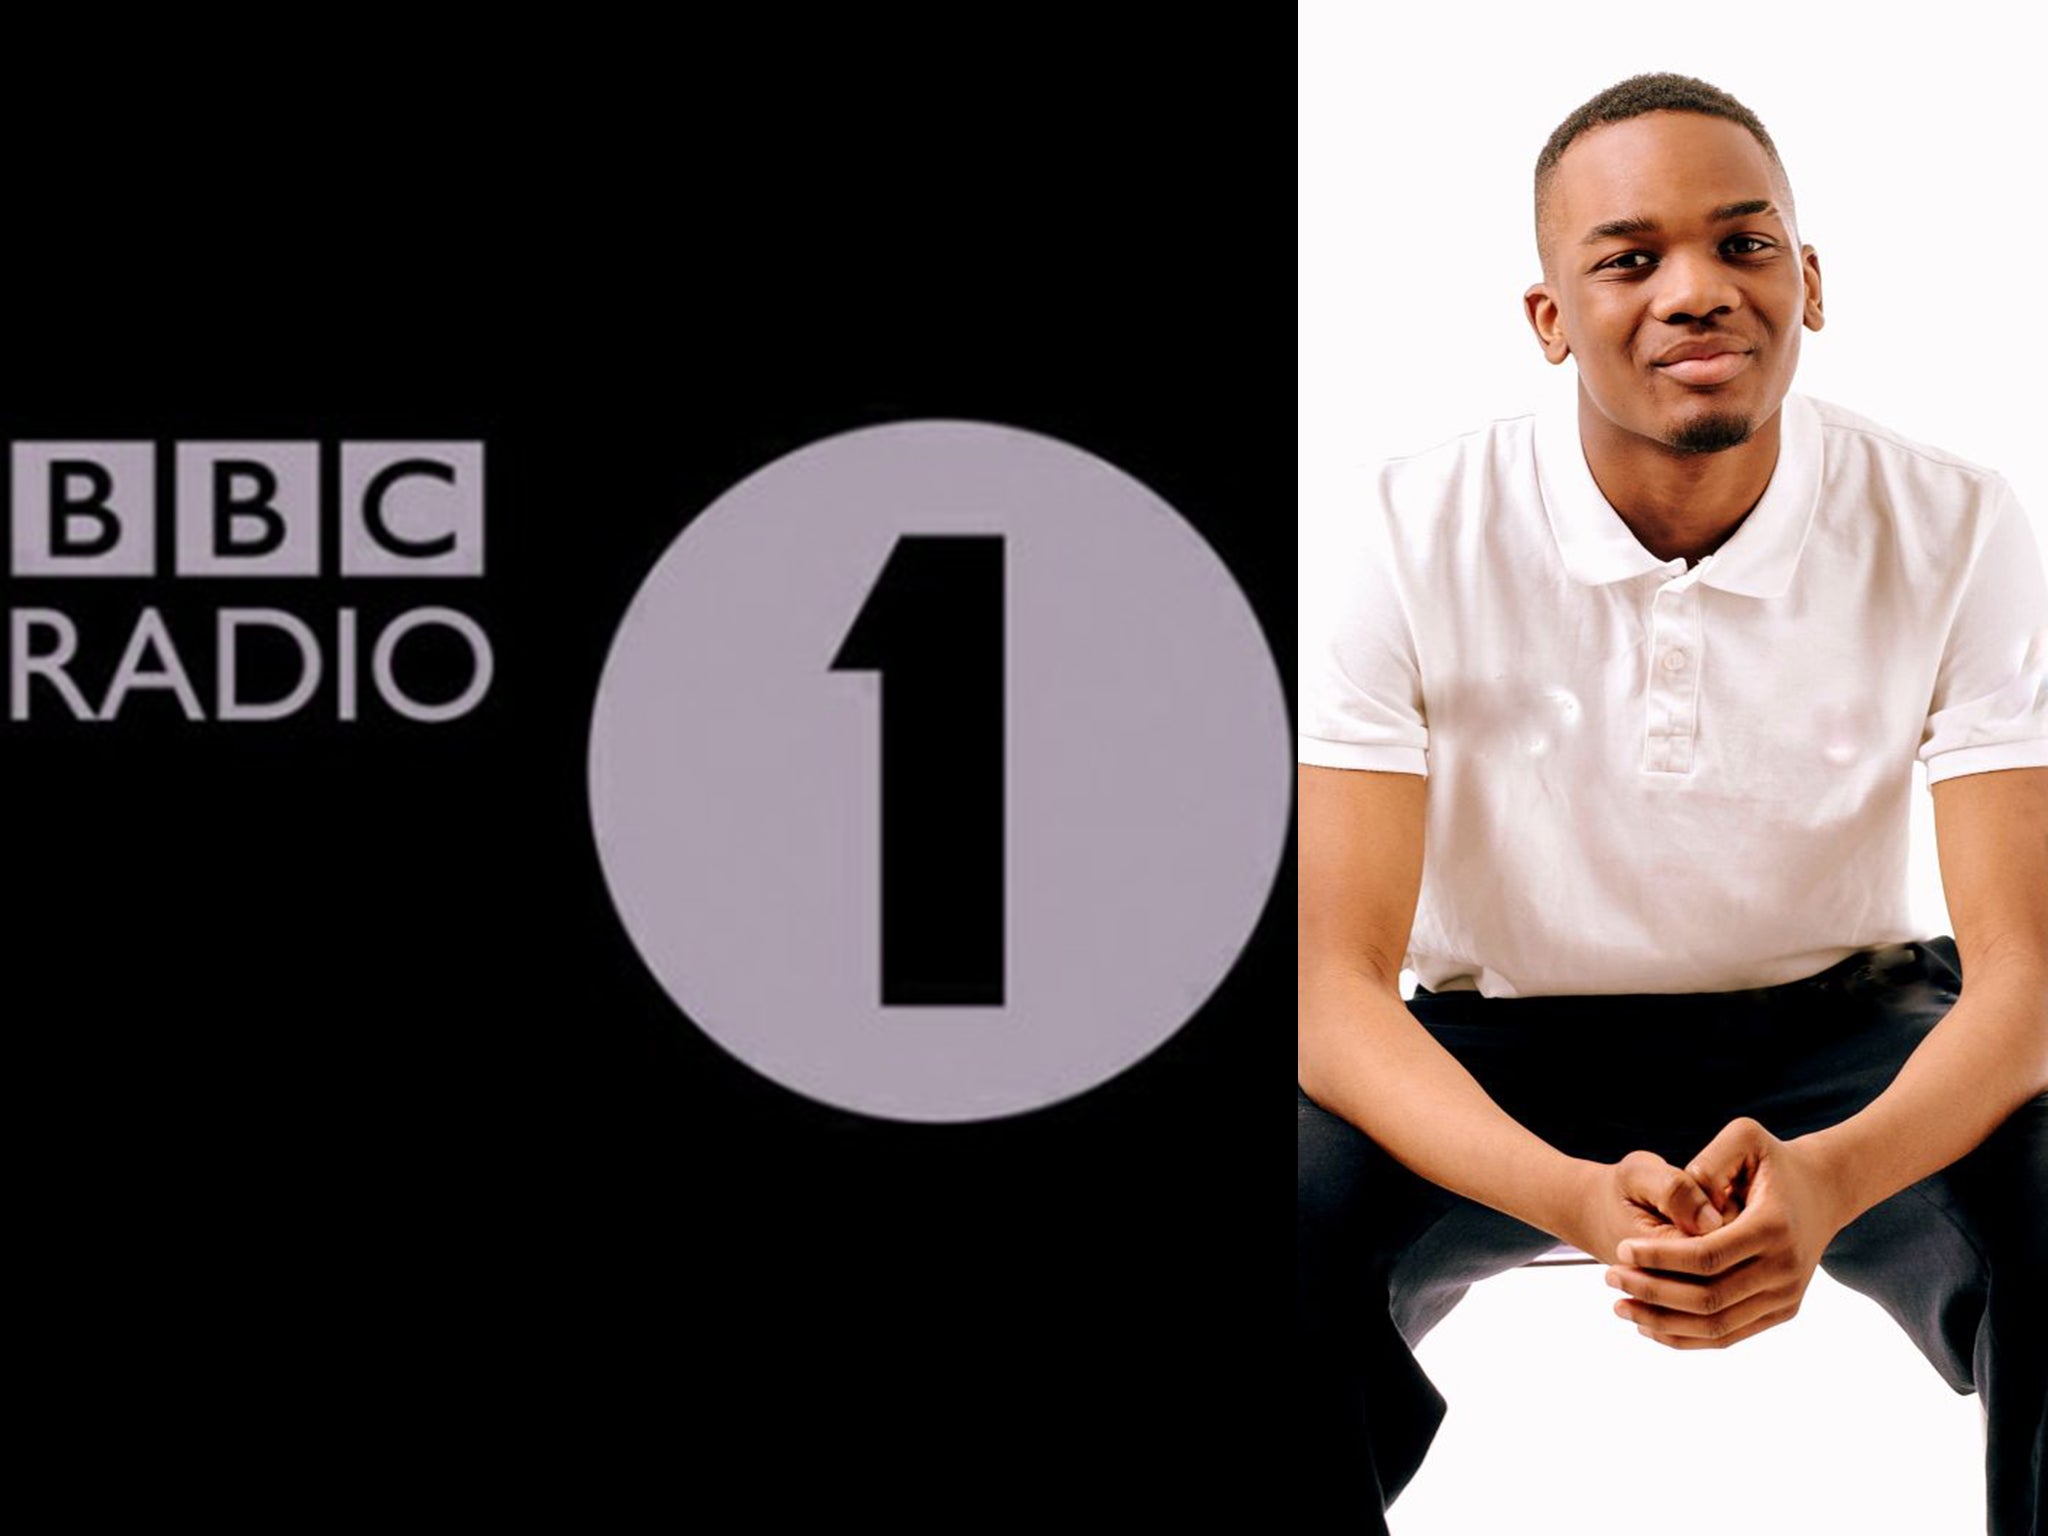 Jeremiah Emmanuel pitched the idea of the Youth Council to the Radio 1 controller Ben Cooper